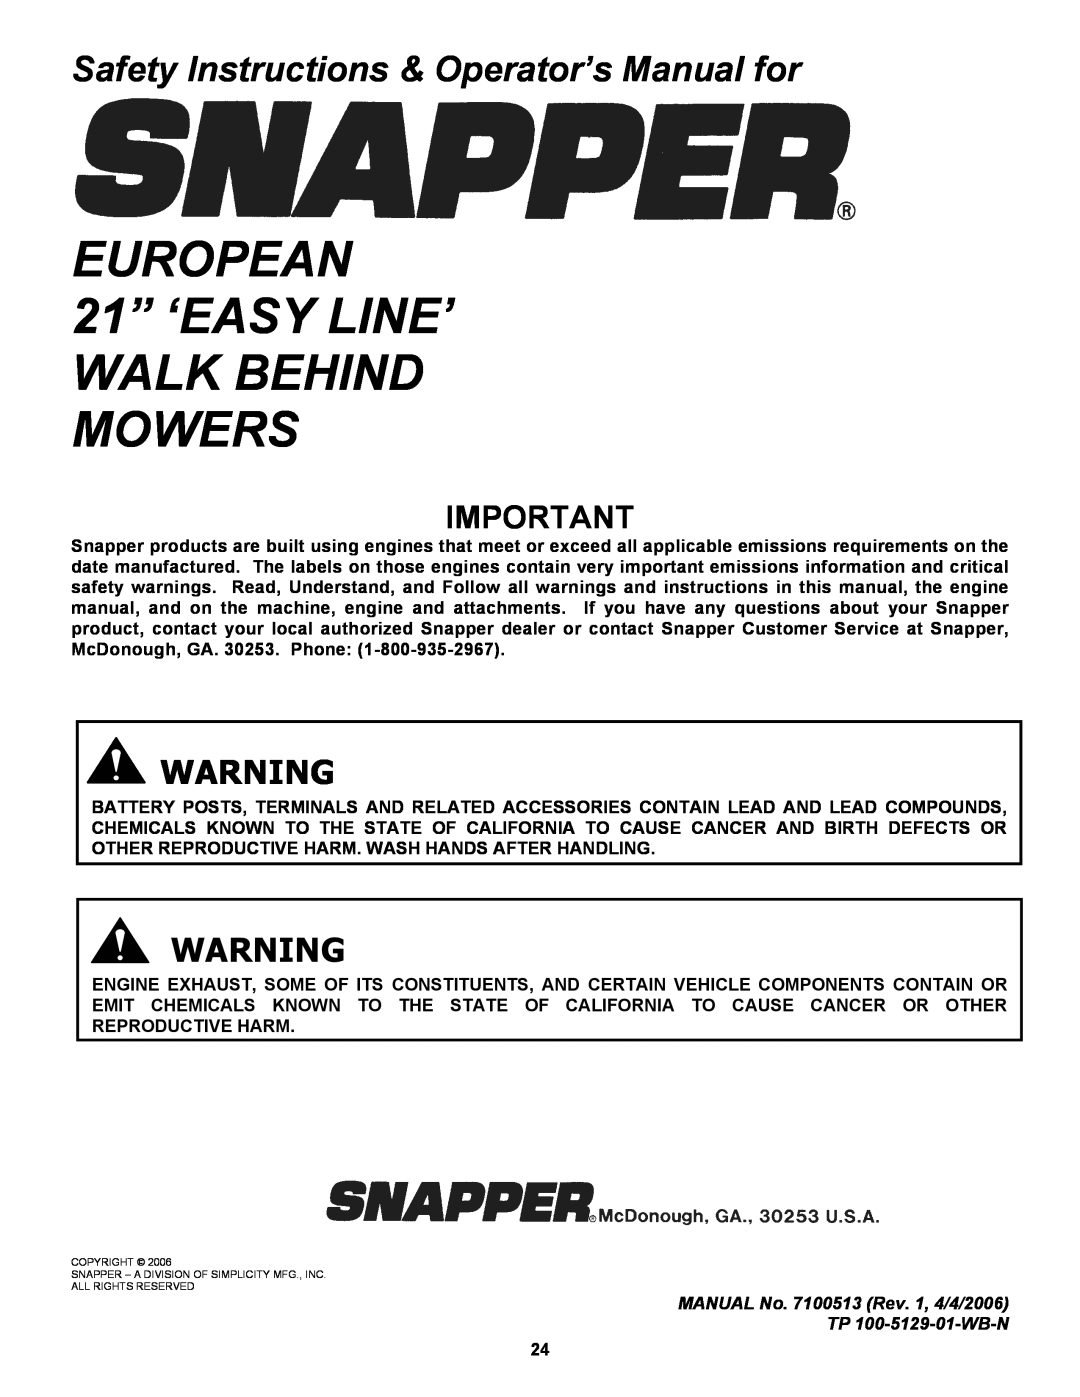 Snapper ESPV21, ESPV21S EUROPEAN 21” ‘EASY LINE’ WALK BEHIND MOWERS, Safety Instructions & Operator’s Manual for 